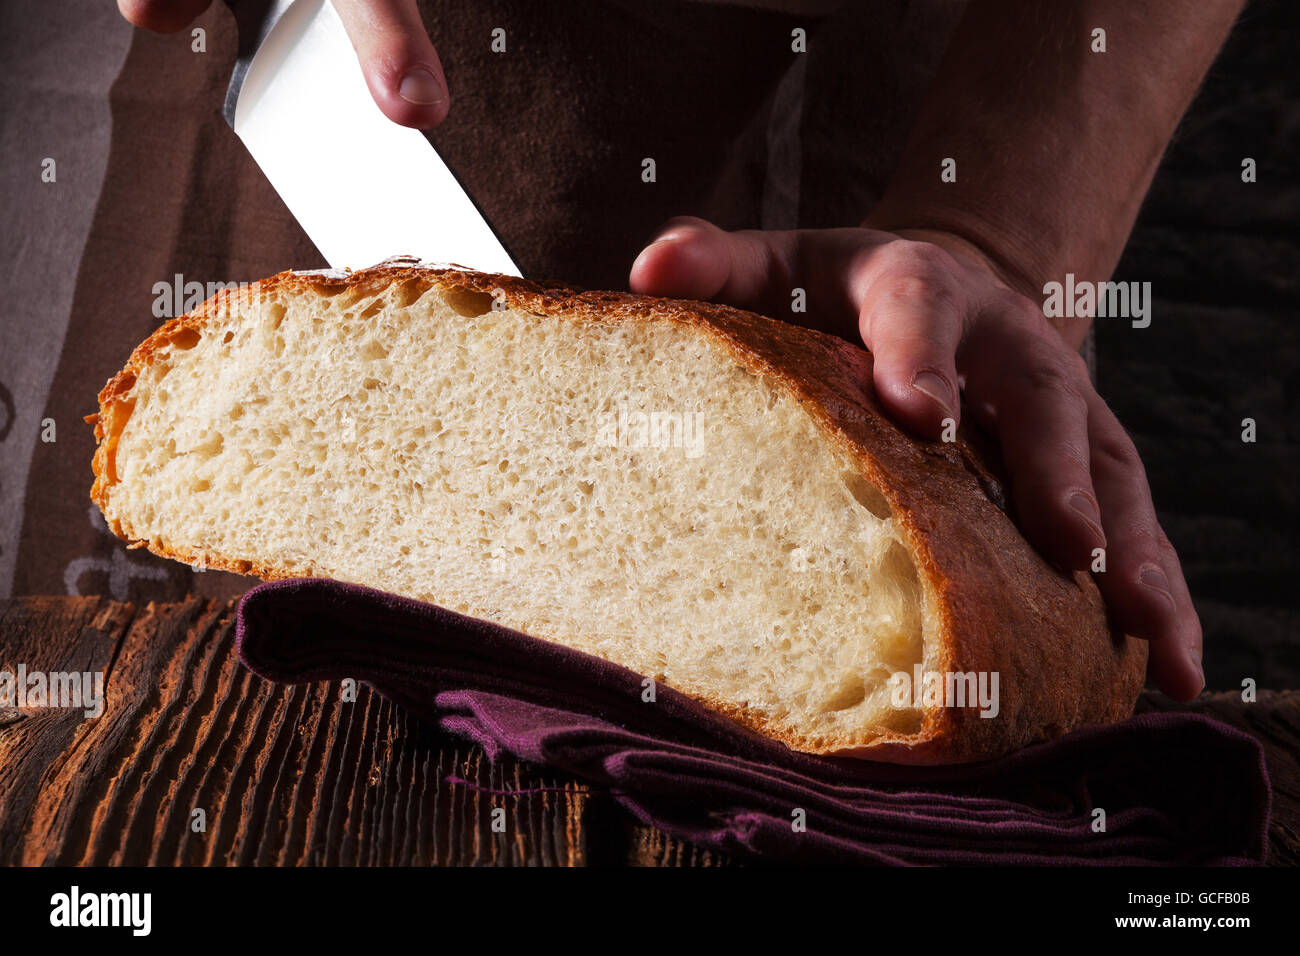 Baker cutting and holding fresh made bread  isolated on white background. Baker and bakery, rustic styles. Stock Photo